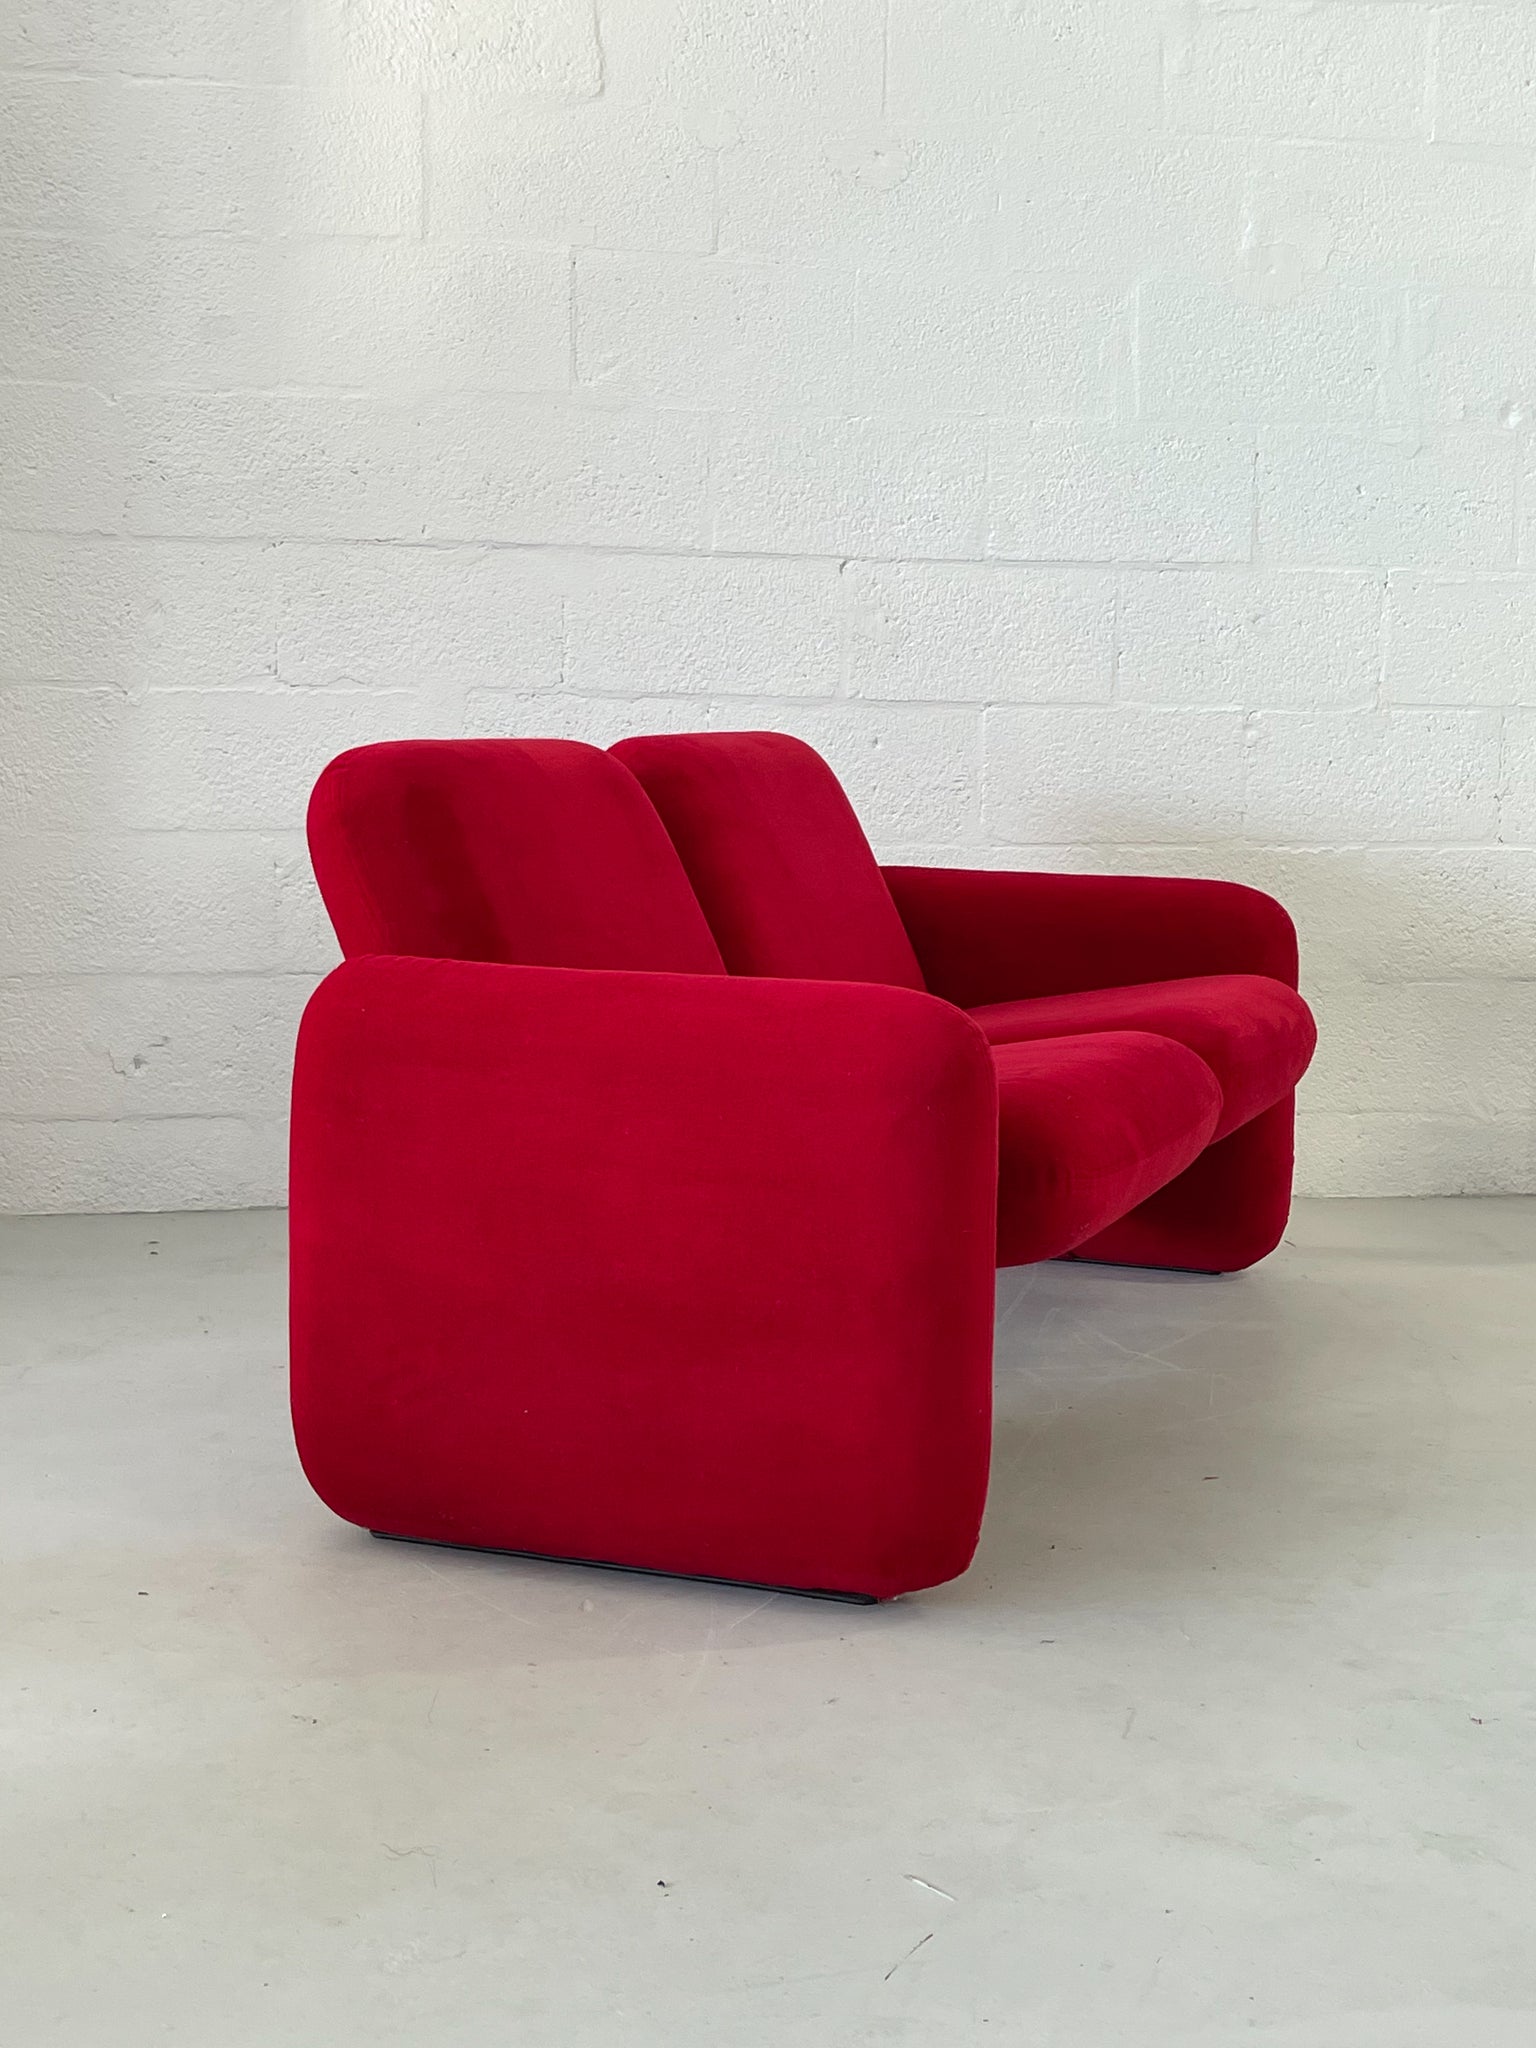 Profile angle of Chiclet Sofa by Ray Wilkes for Herman Miller in Red Velvet